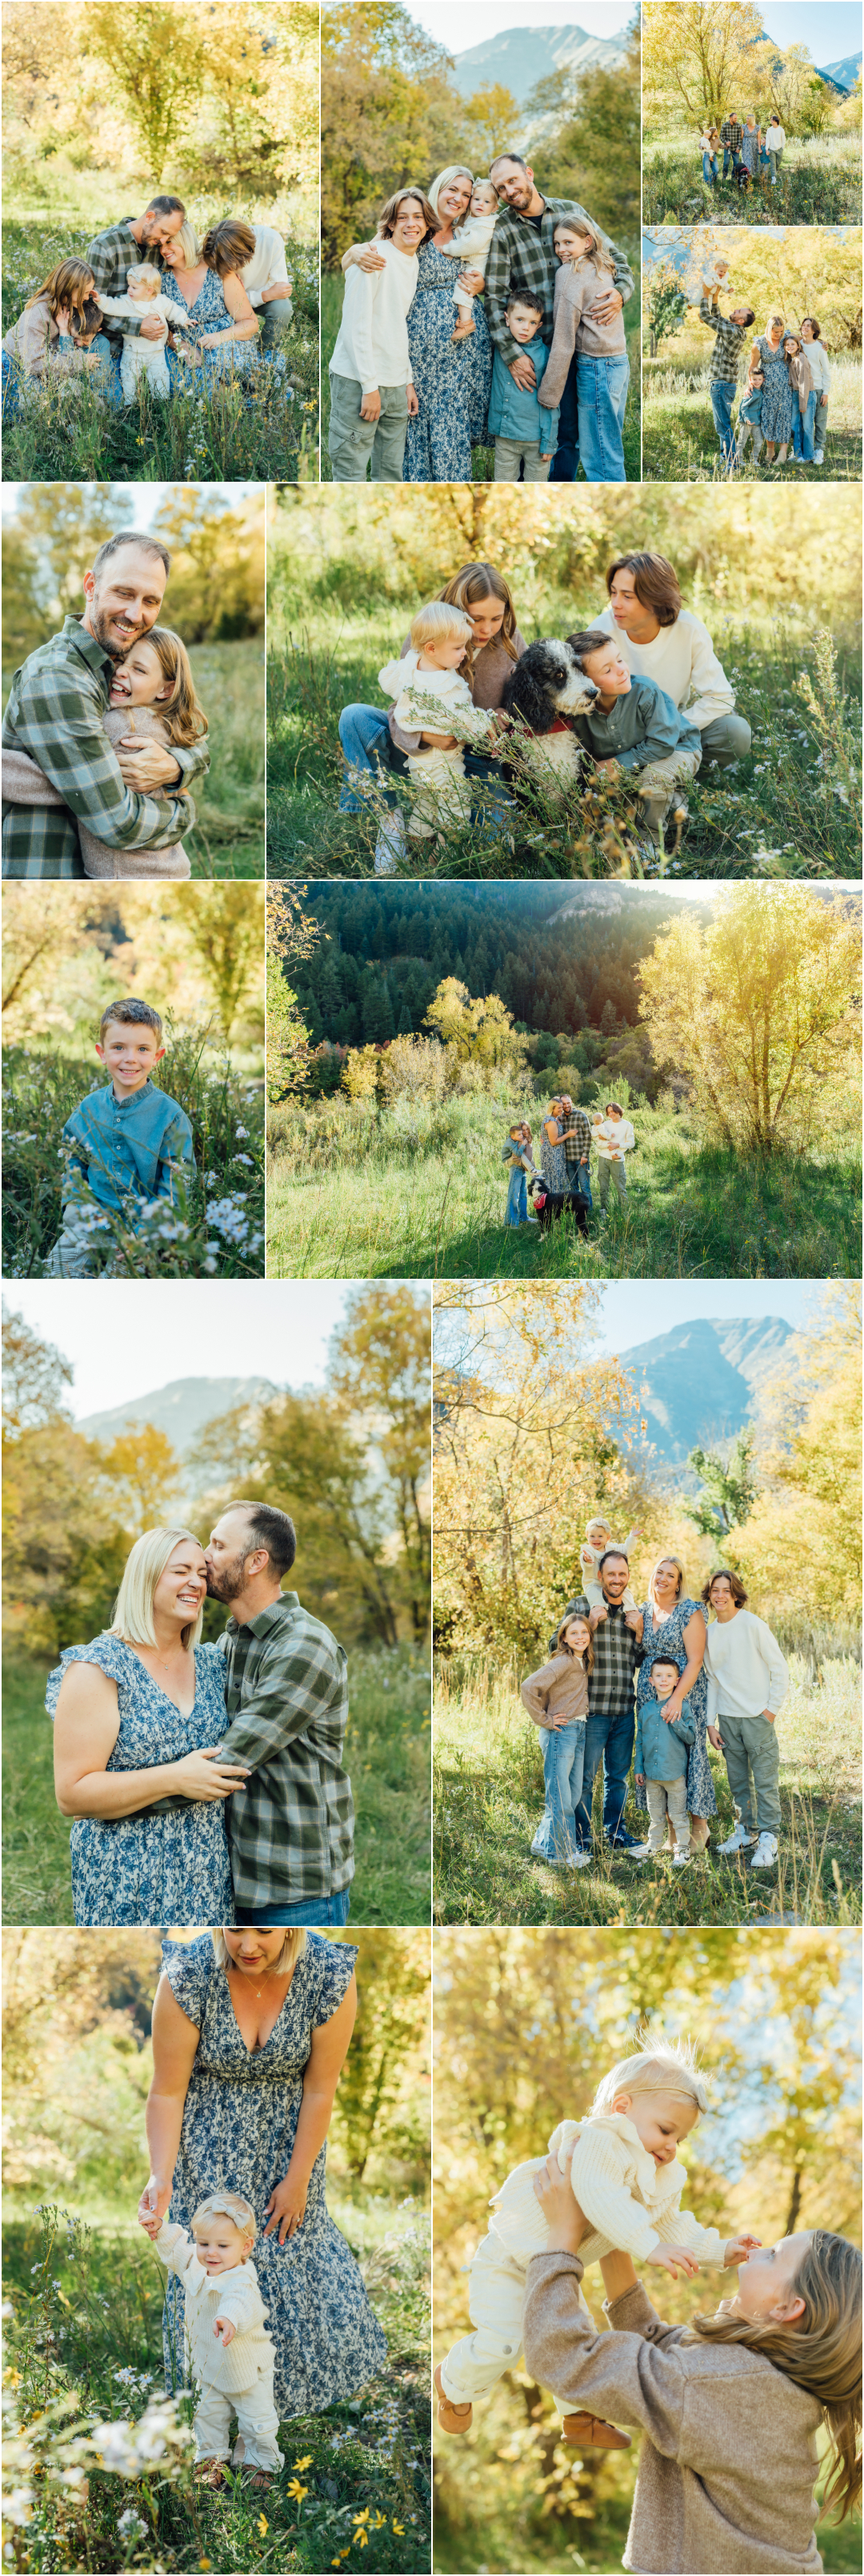 Family of 6 Pictures - Wild Flower Family Photography